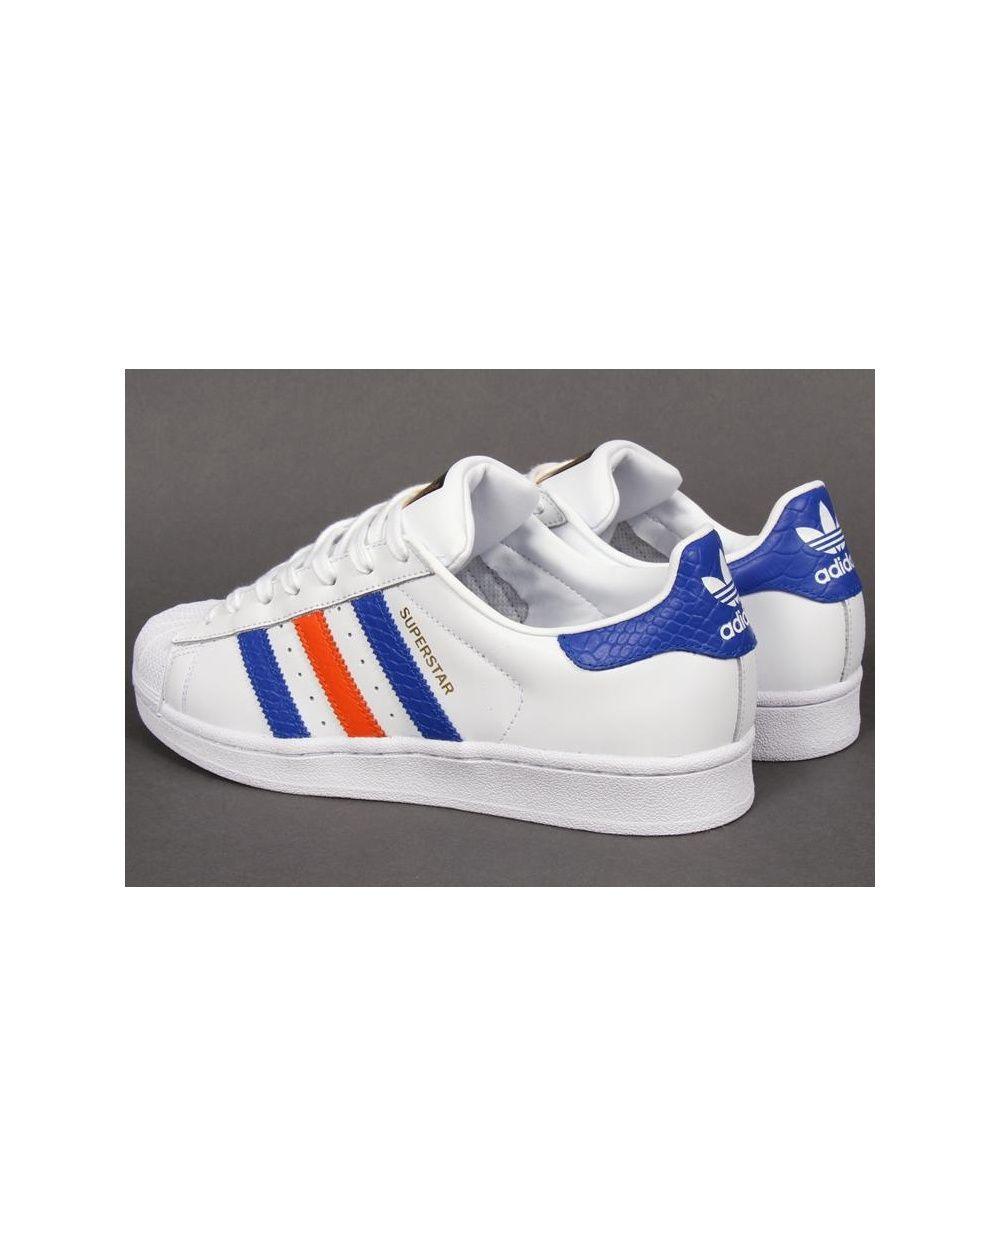 Light Blue Red Orange and Blue Logo - Adidas Superstar Trainers White Blue Red, Originals, Shell Toe Shoes